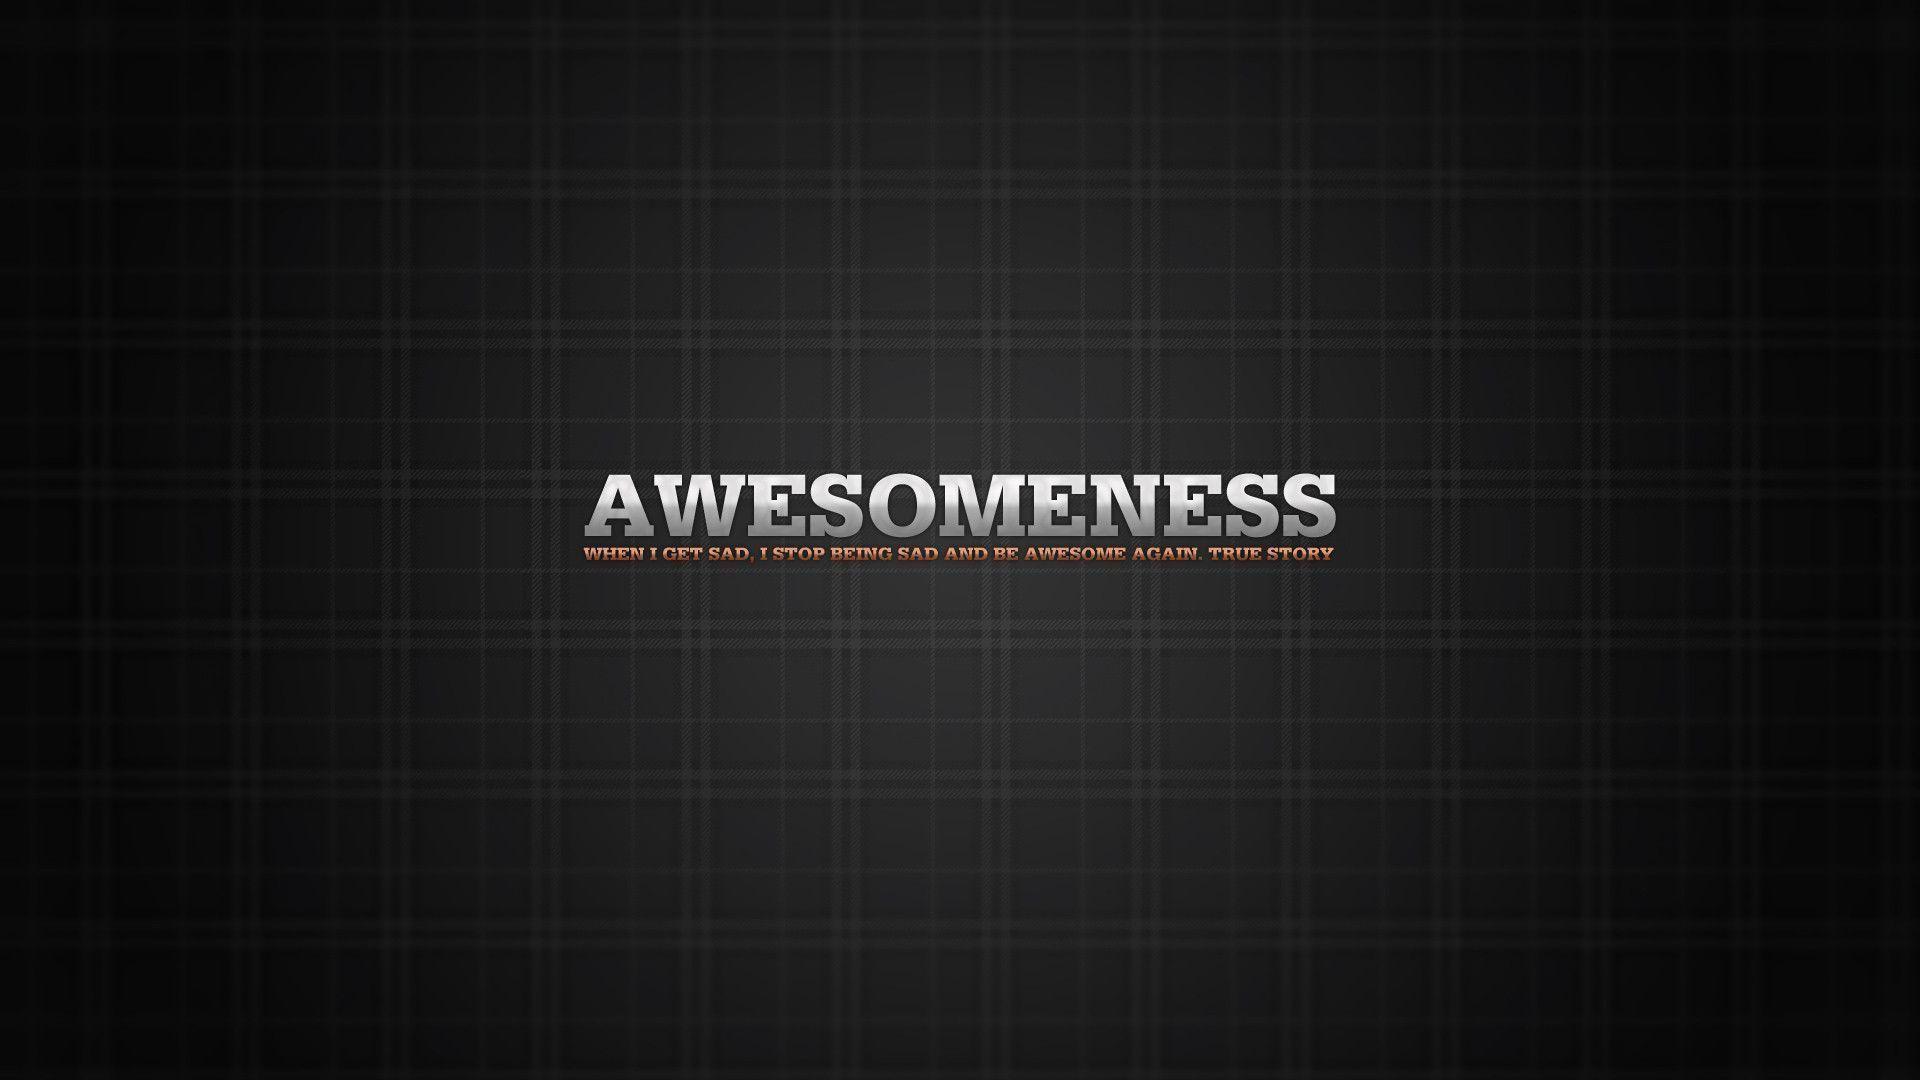 Awesomeness, Full HD wallpaper, funny quote, true story. HD